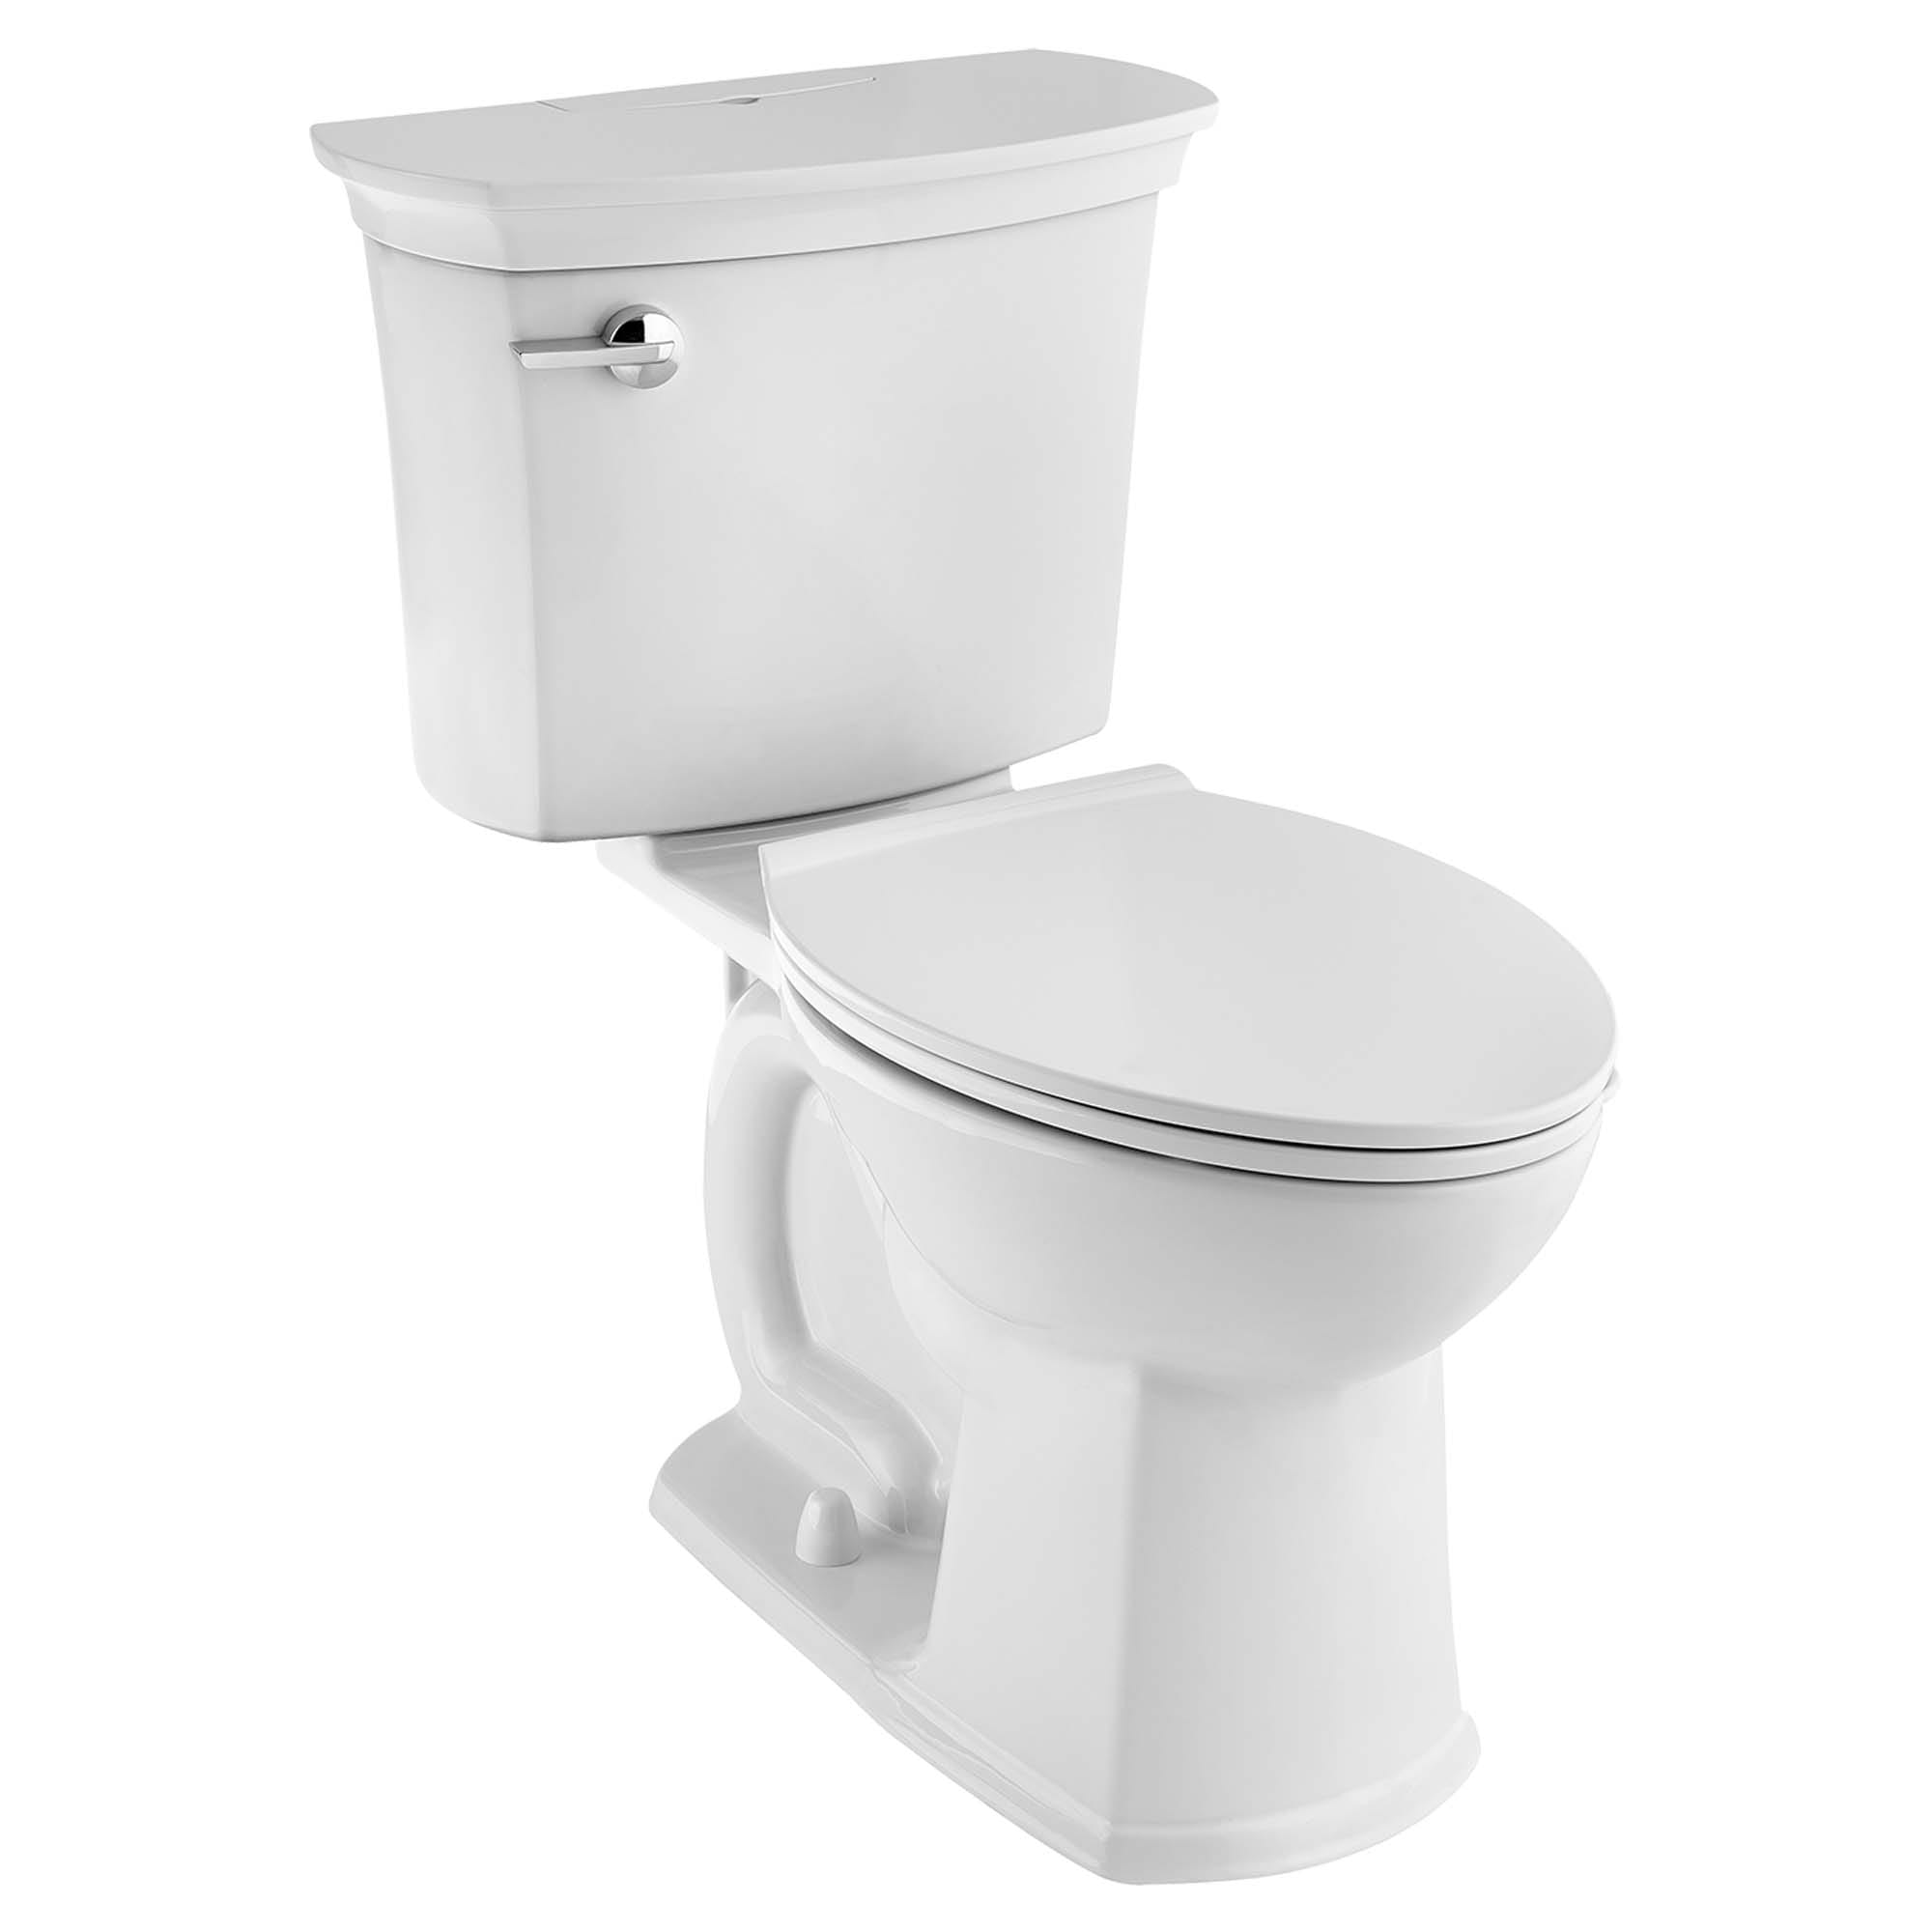 ActiClean 1.28 GPF/4.8 LPF Left Trip Lever Chair Height Elongated-Front Toilet